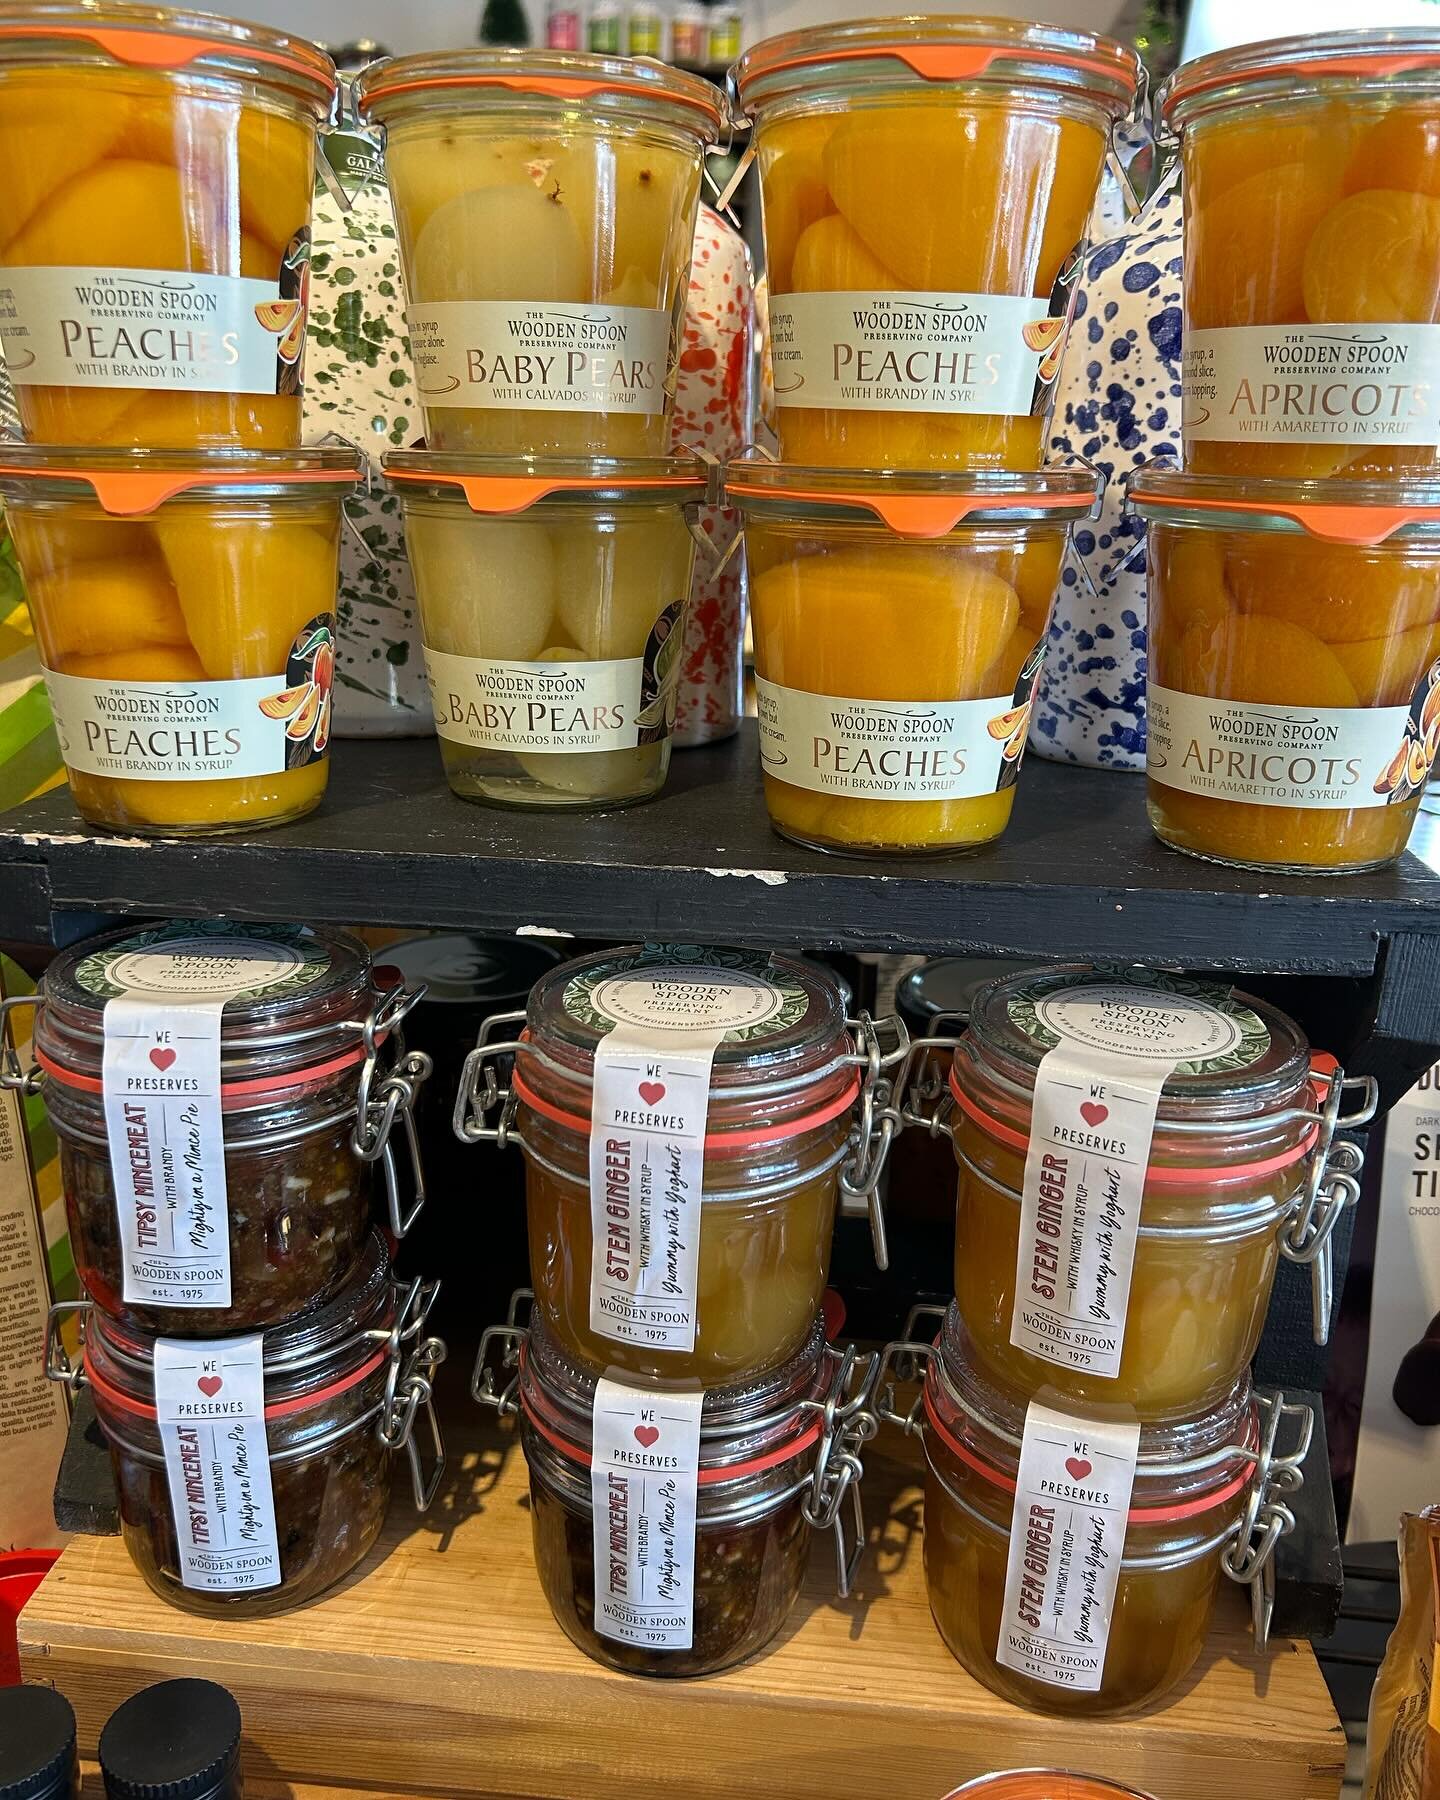 These preserves would be a lovely gift 😍🎄🥝